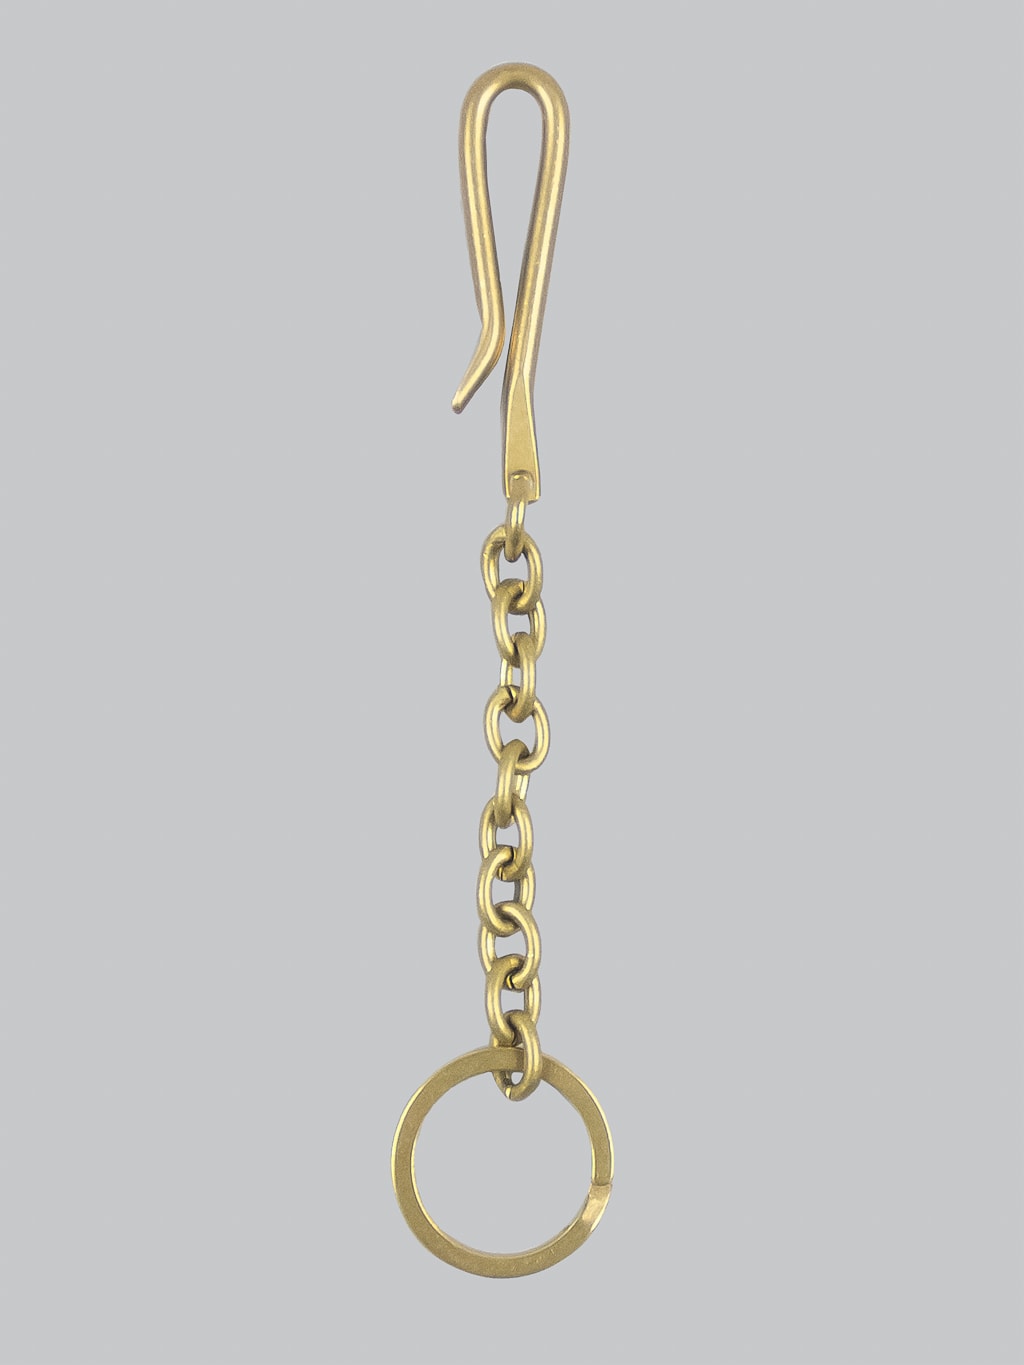 Solid Brass Belt Hook and Chain